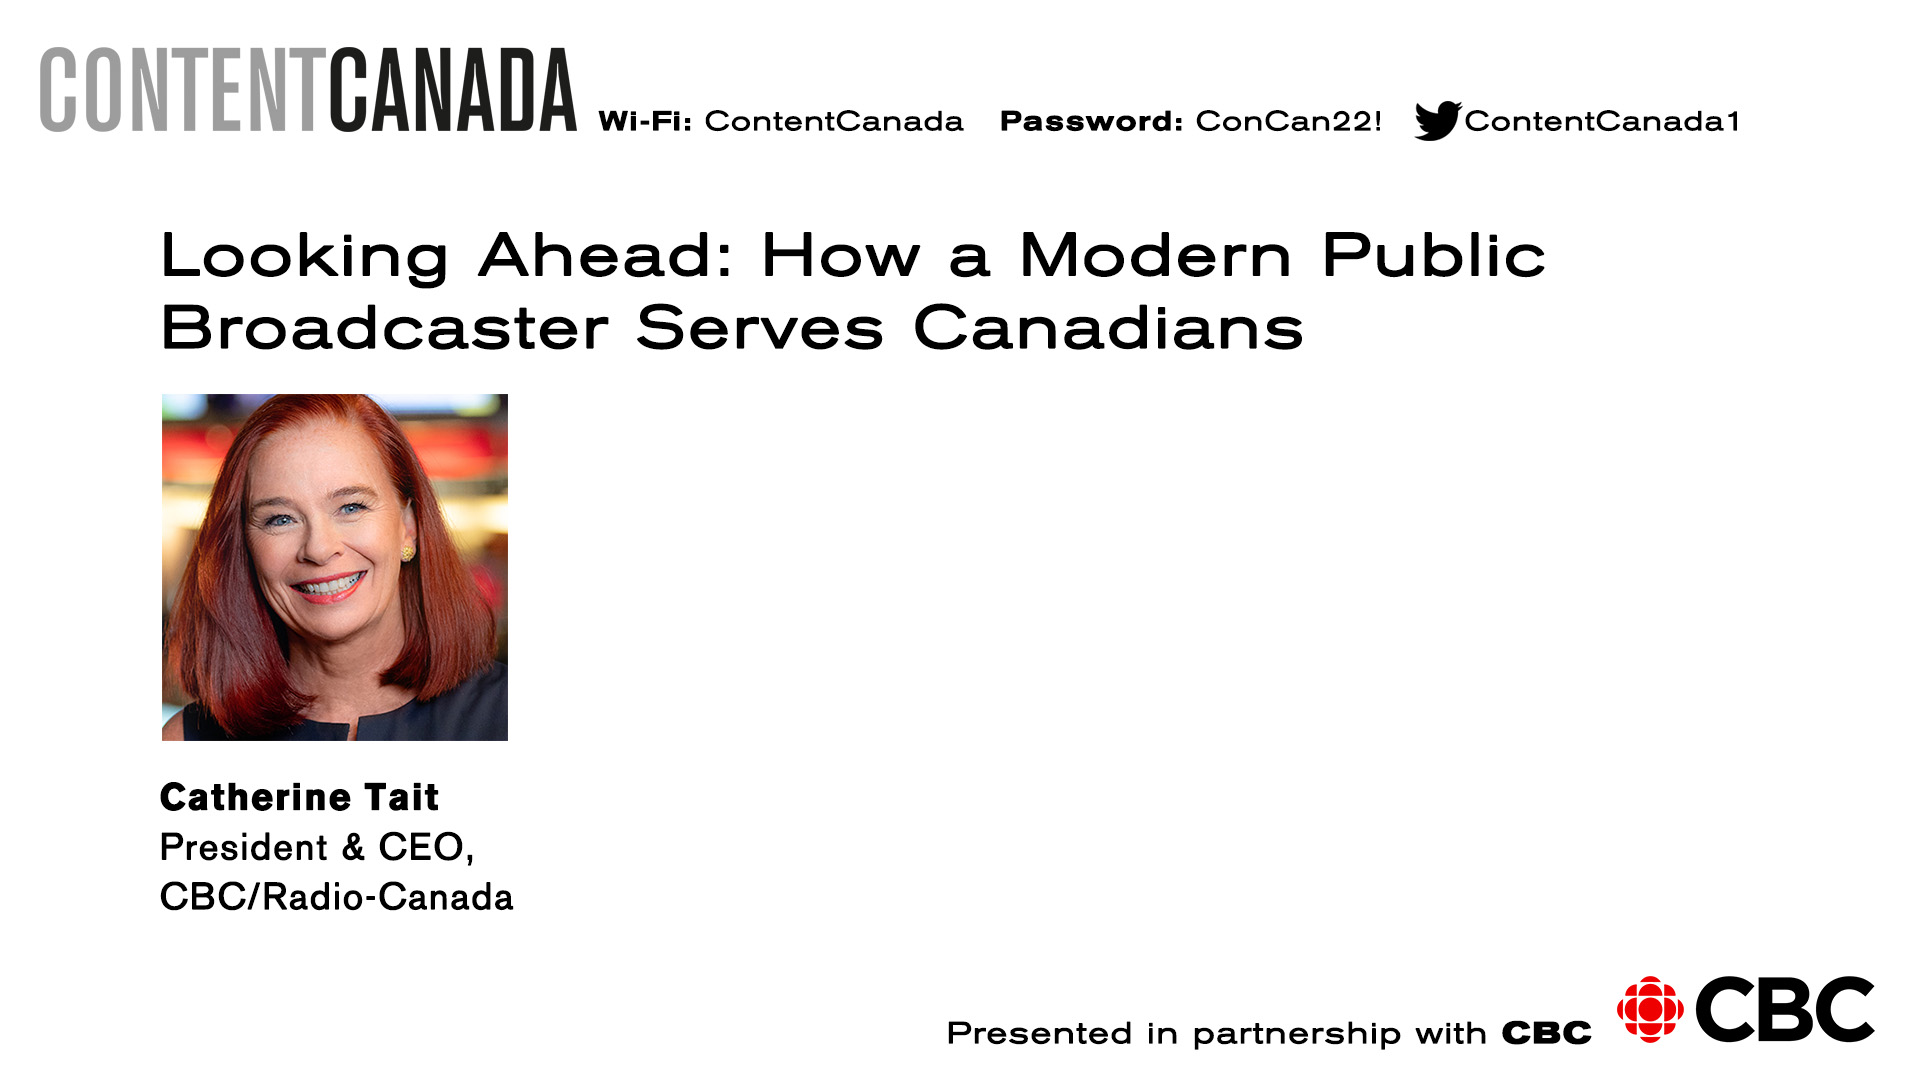 Looking Ahead: How a Modern Public Broadcaster Serves Canadians